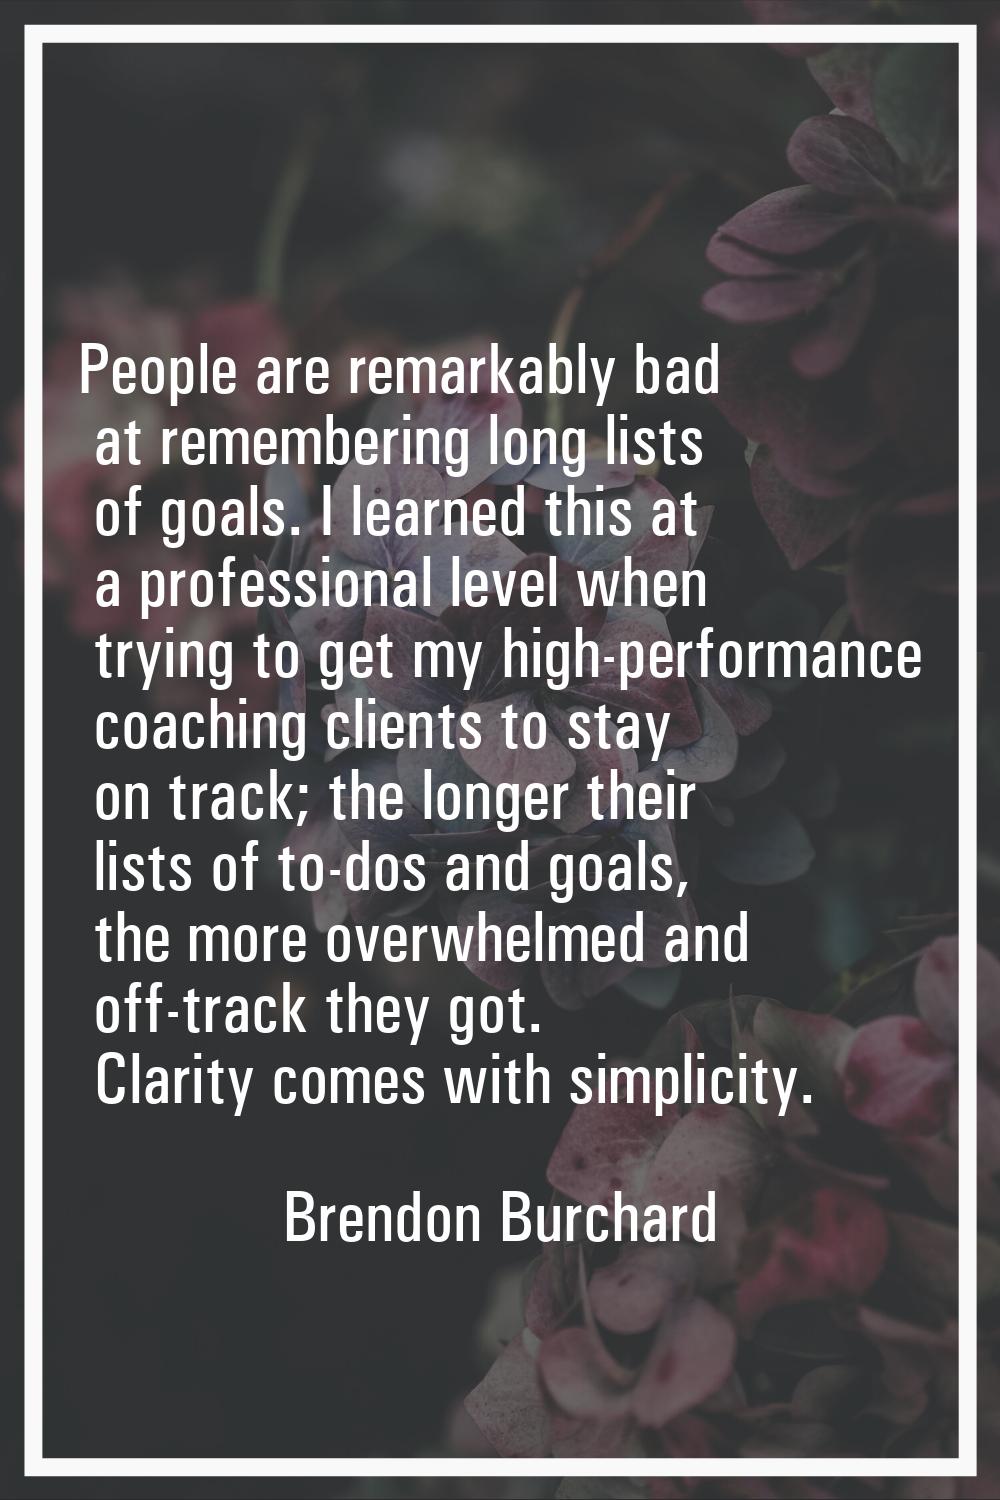 People are remarkably bad at remembering long lists of goals. I learned this at a professional leve